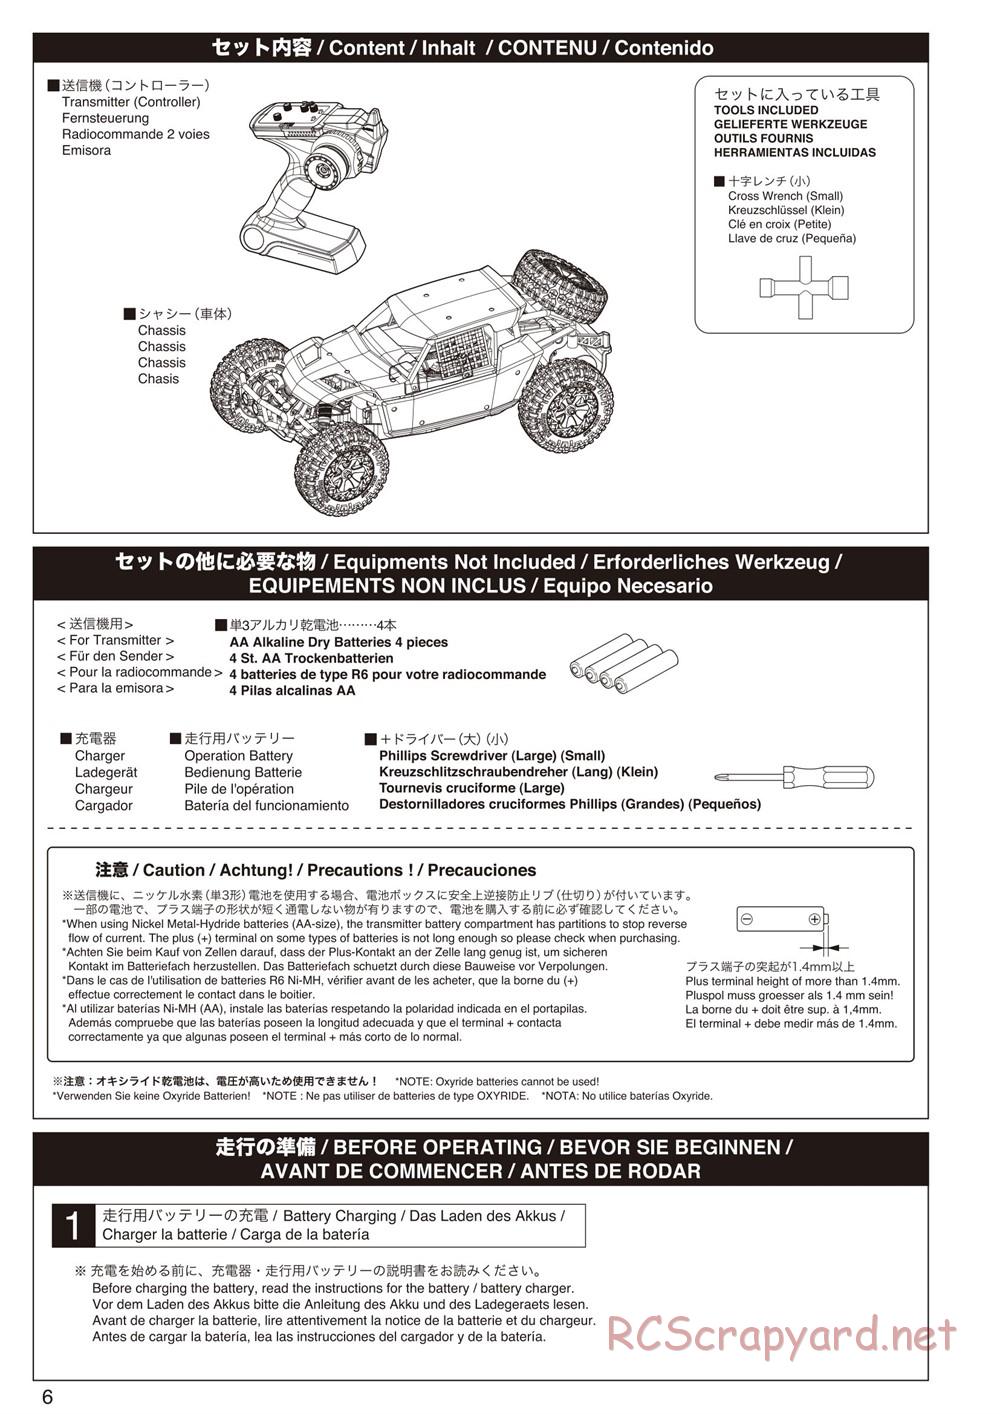 Kyosho - Axxe 2WD Desert Buggy - Manual - Page 6